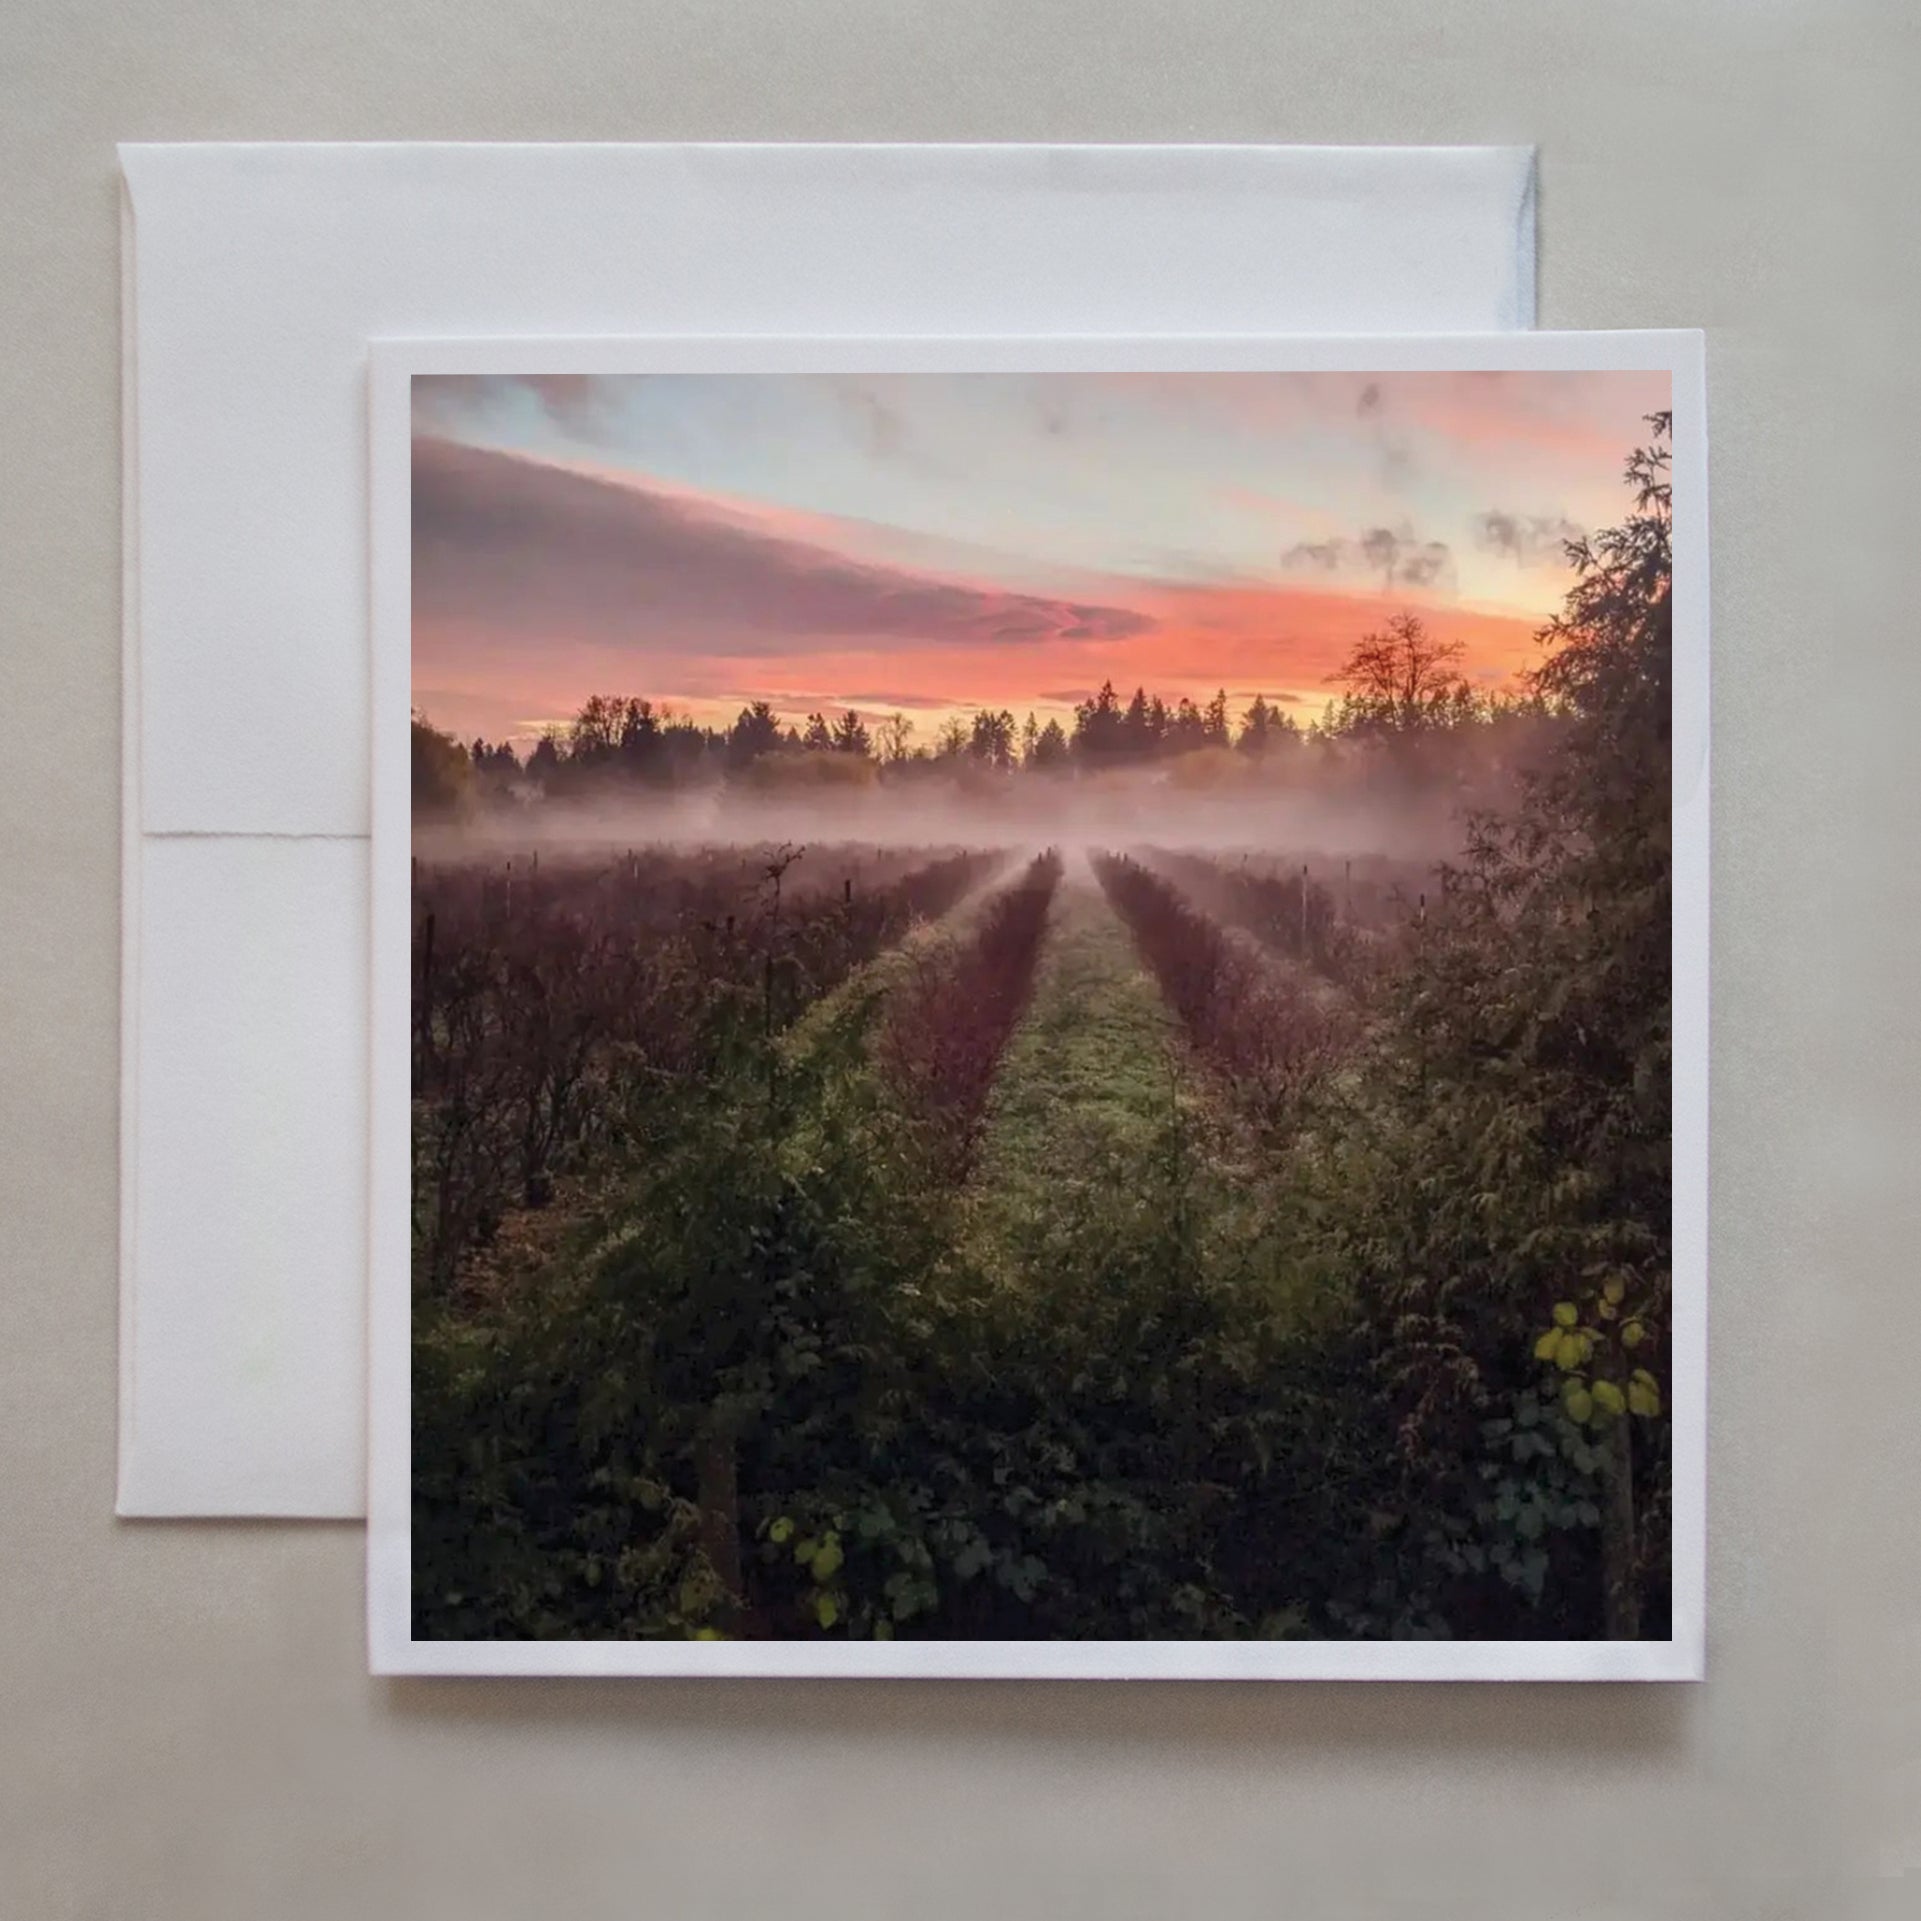 This sunrise photo card shows mist rising from Langley Field by photographed by Jennifer Echols.